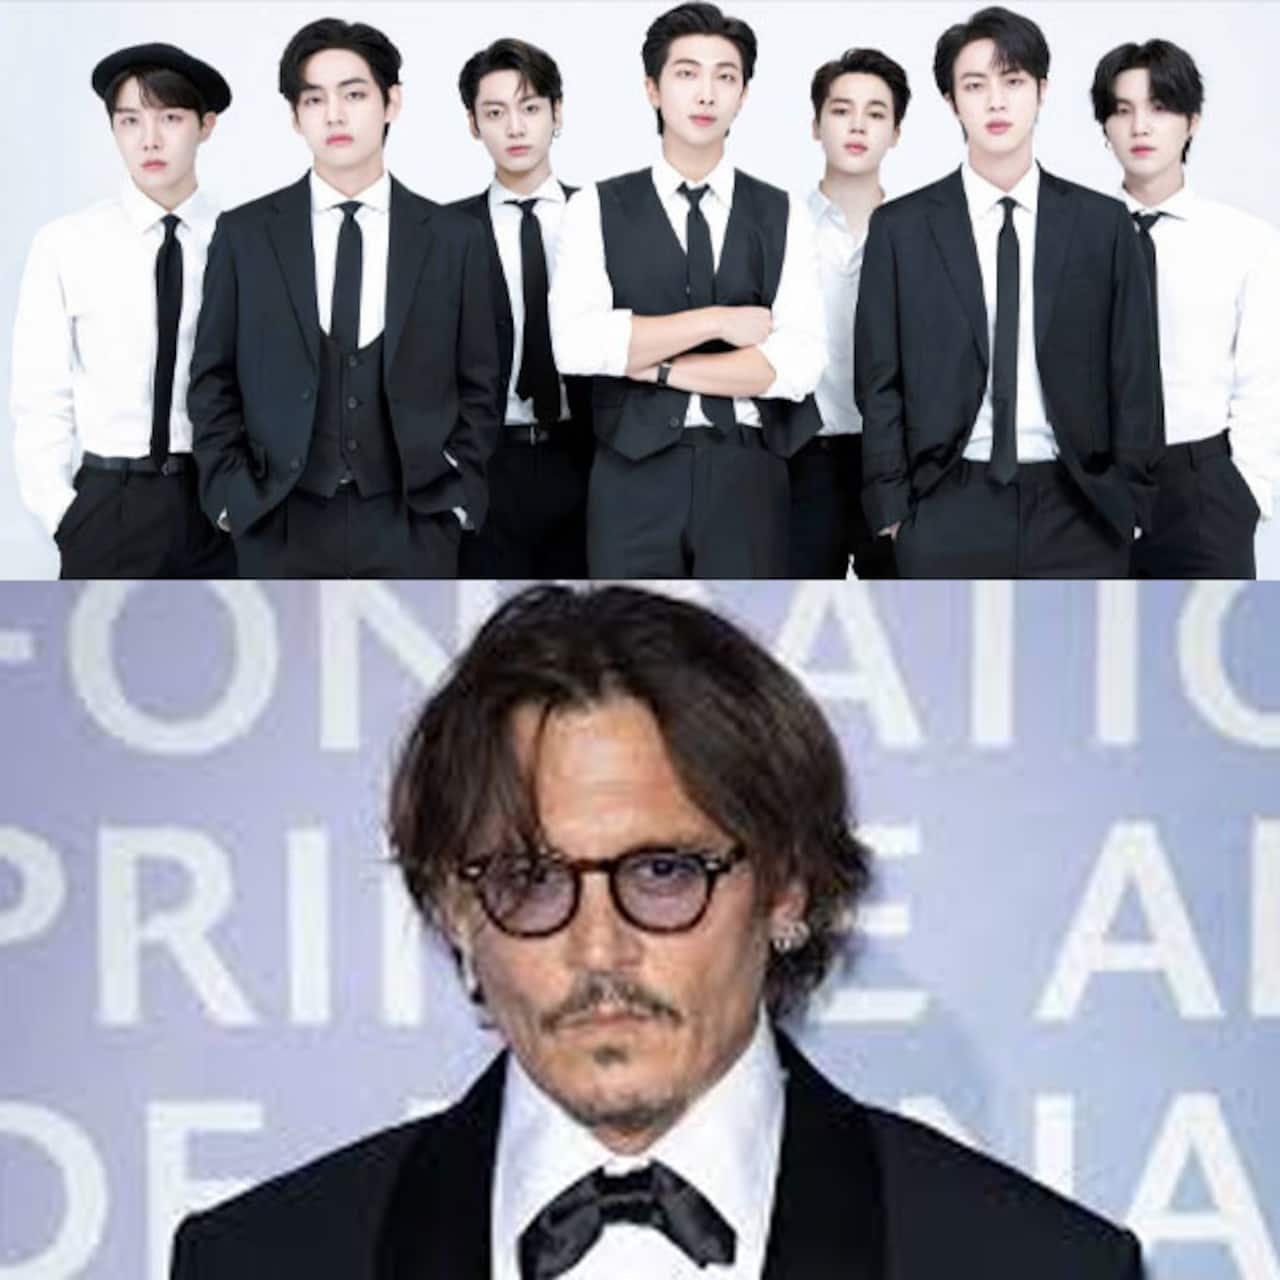 Top Hollywood News Weekly Rewind: BTS announces military enlistment, Johnny Depp's Jack Sparrow costume in demand for Halloween and more